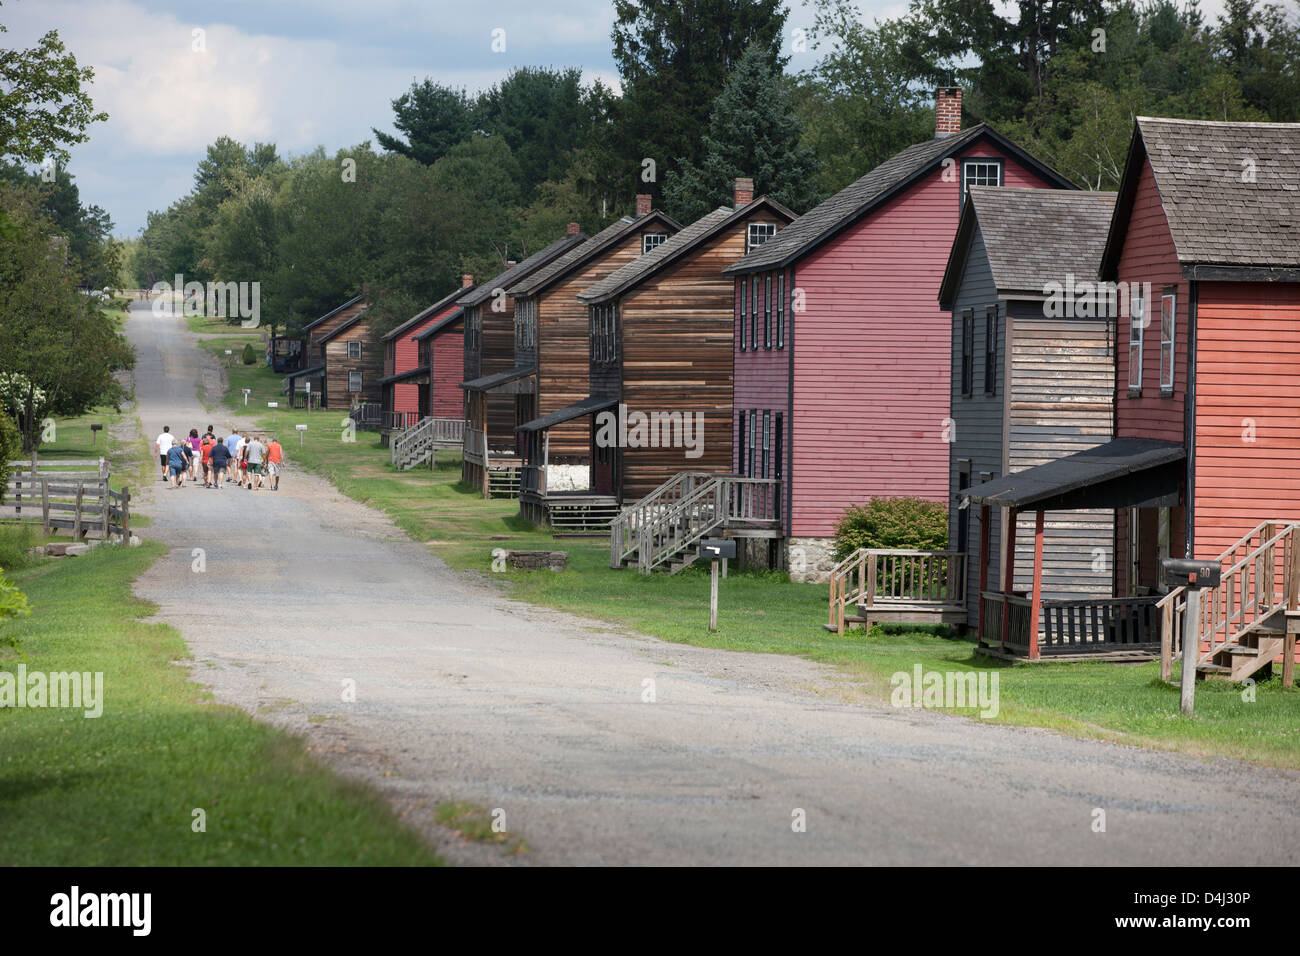 ROWS OF HOMES HISTORIC ECKLEY MINERS VILLAGE MUSEUM WEATHERLY POCONOS PENNSYLVANIA USA Stock Photo